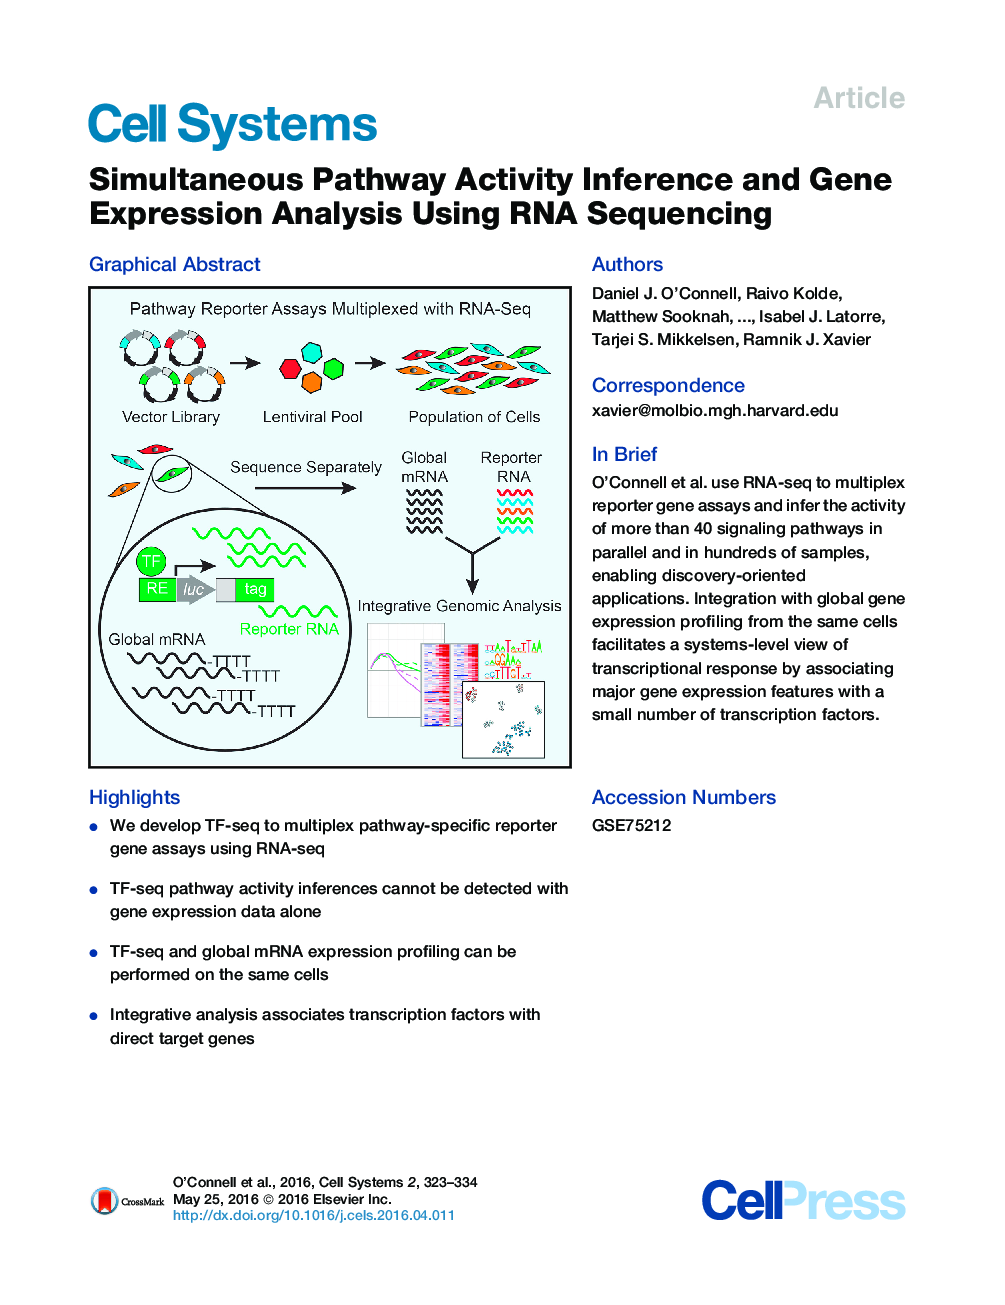 Simultaneous Pathway Activity Inference and Gene Expression Analysis Using RNA Sequencing